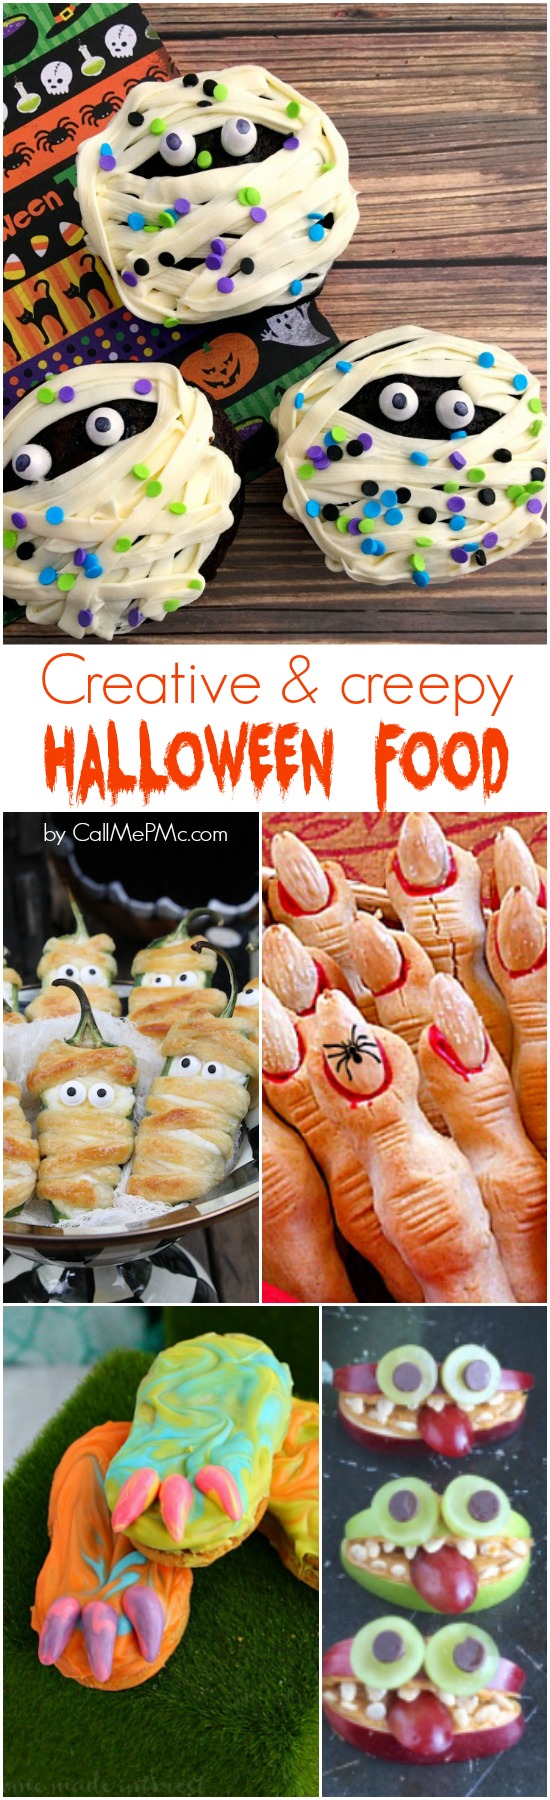 Kids and adults alike love Creative Creepy Halloween Food. Have fun reviewing the recipes below and make them for your Halloween parties or kids' snacks.